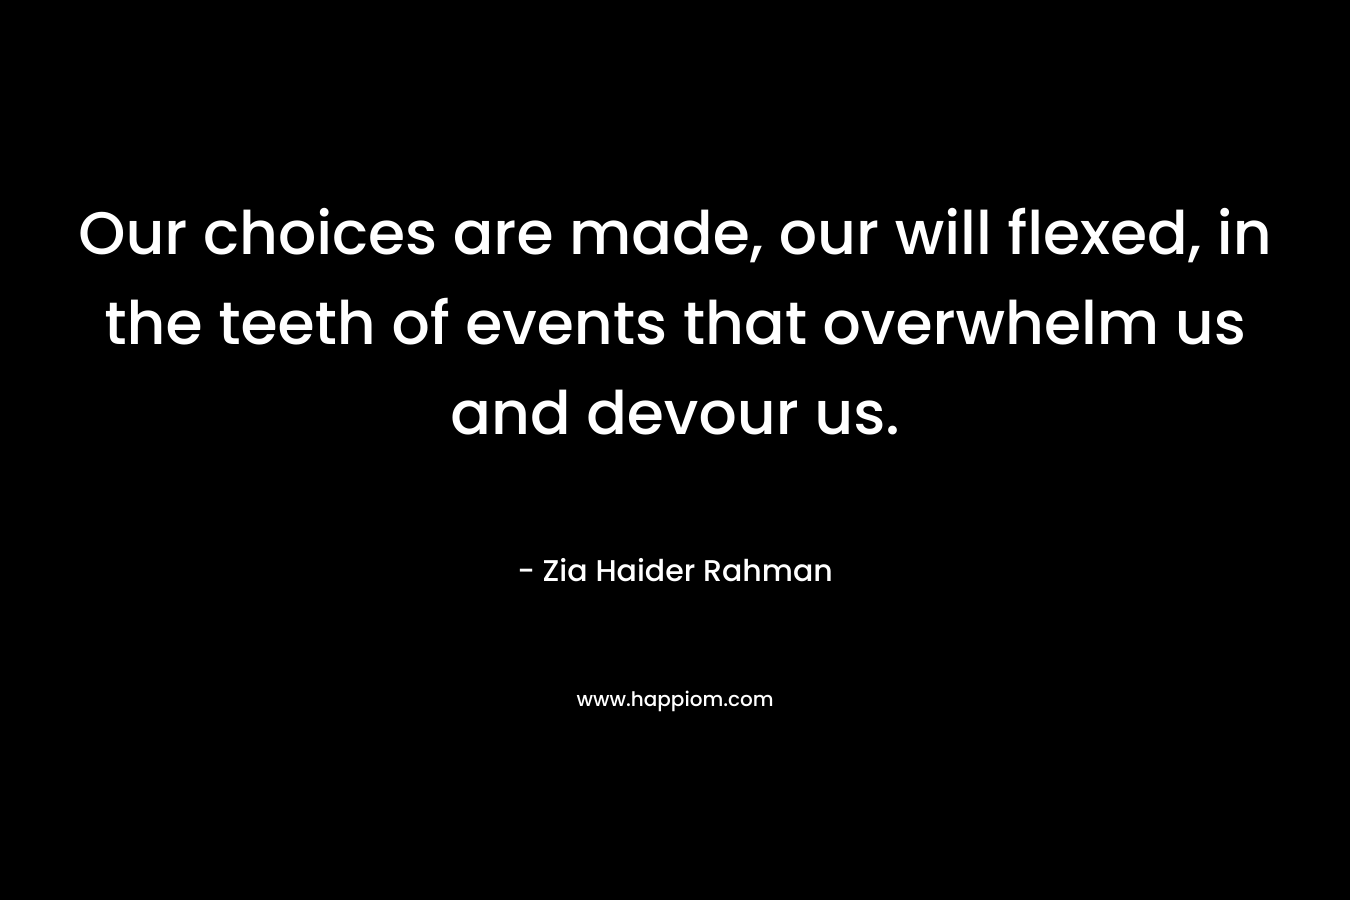 Our choices are made, our will flexed, in the teeth of events that overwhelm us and devour us. – Zia Haider Rahman